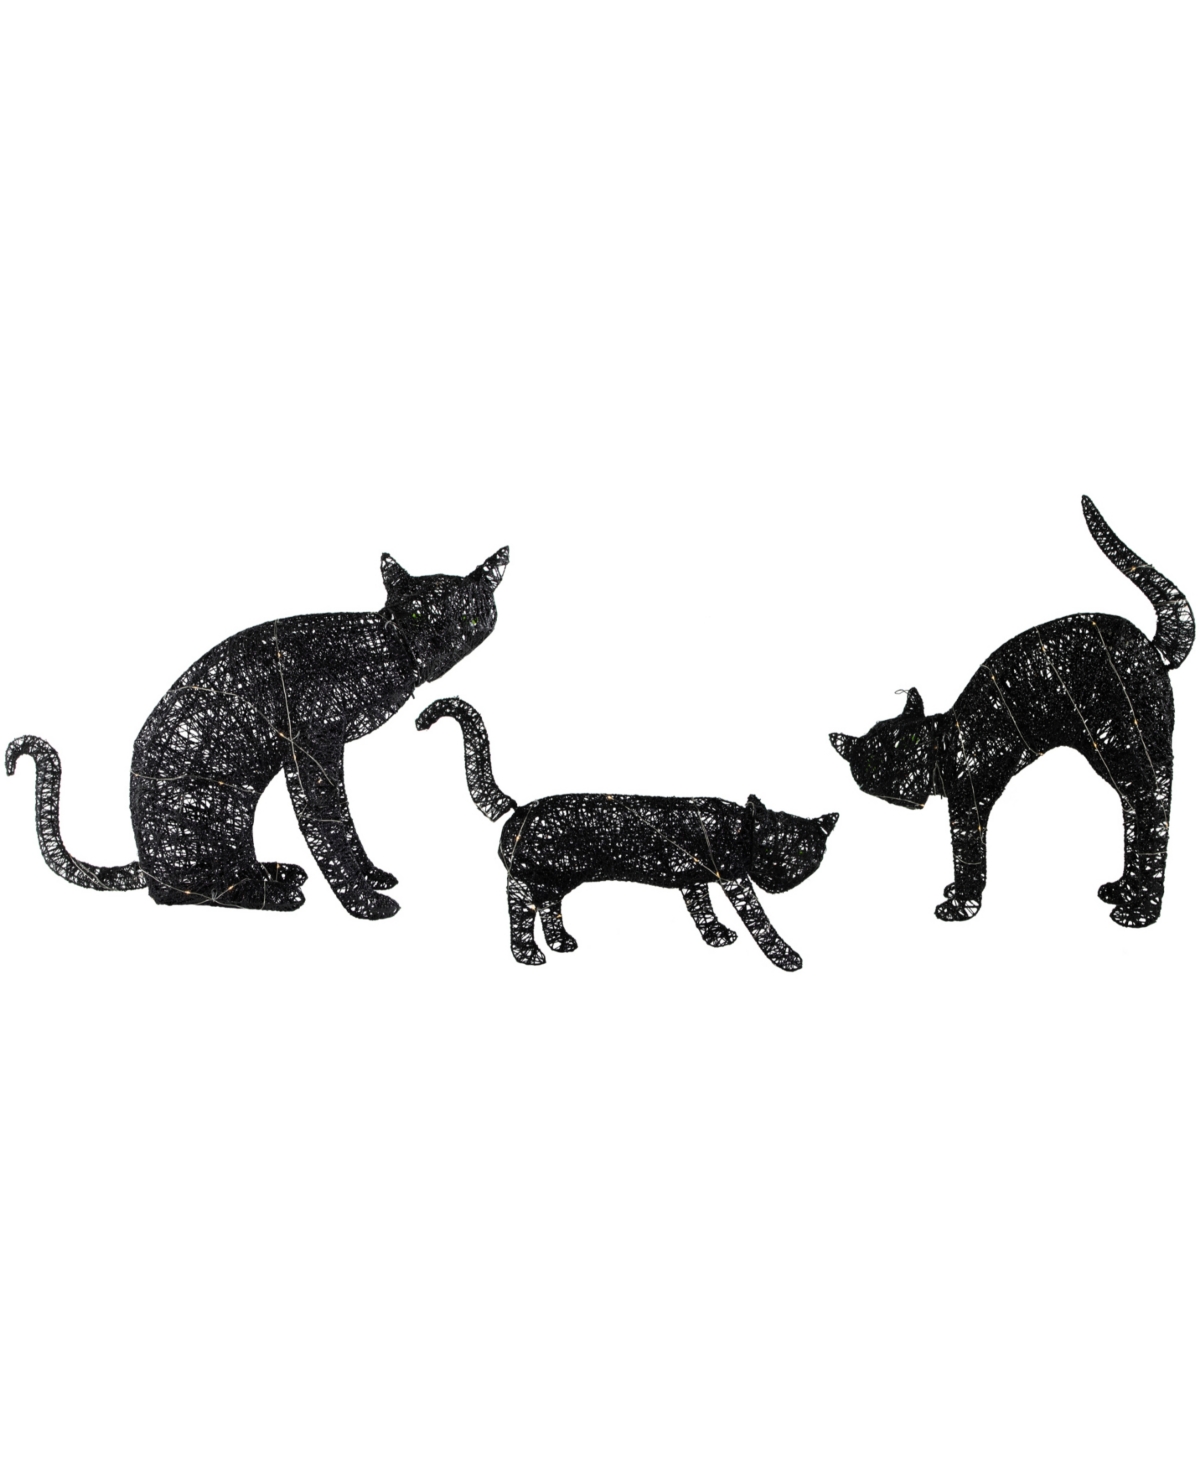 Set of 3 Led Lighted Black Cat Family Outdoor Halloween Decorations 27.5" - Black